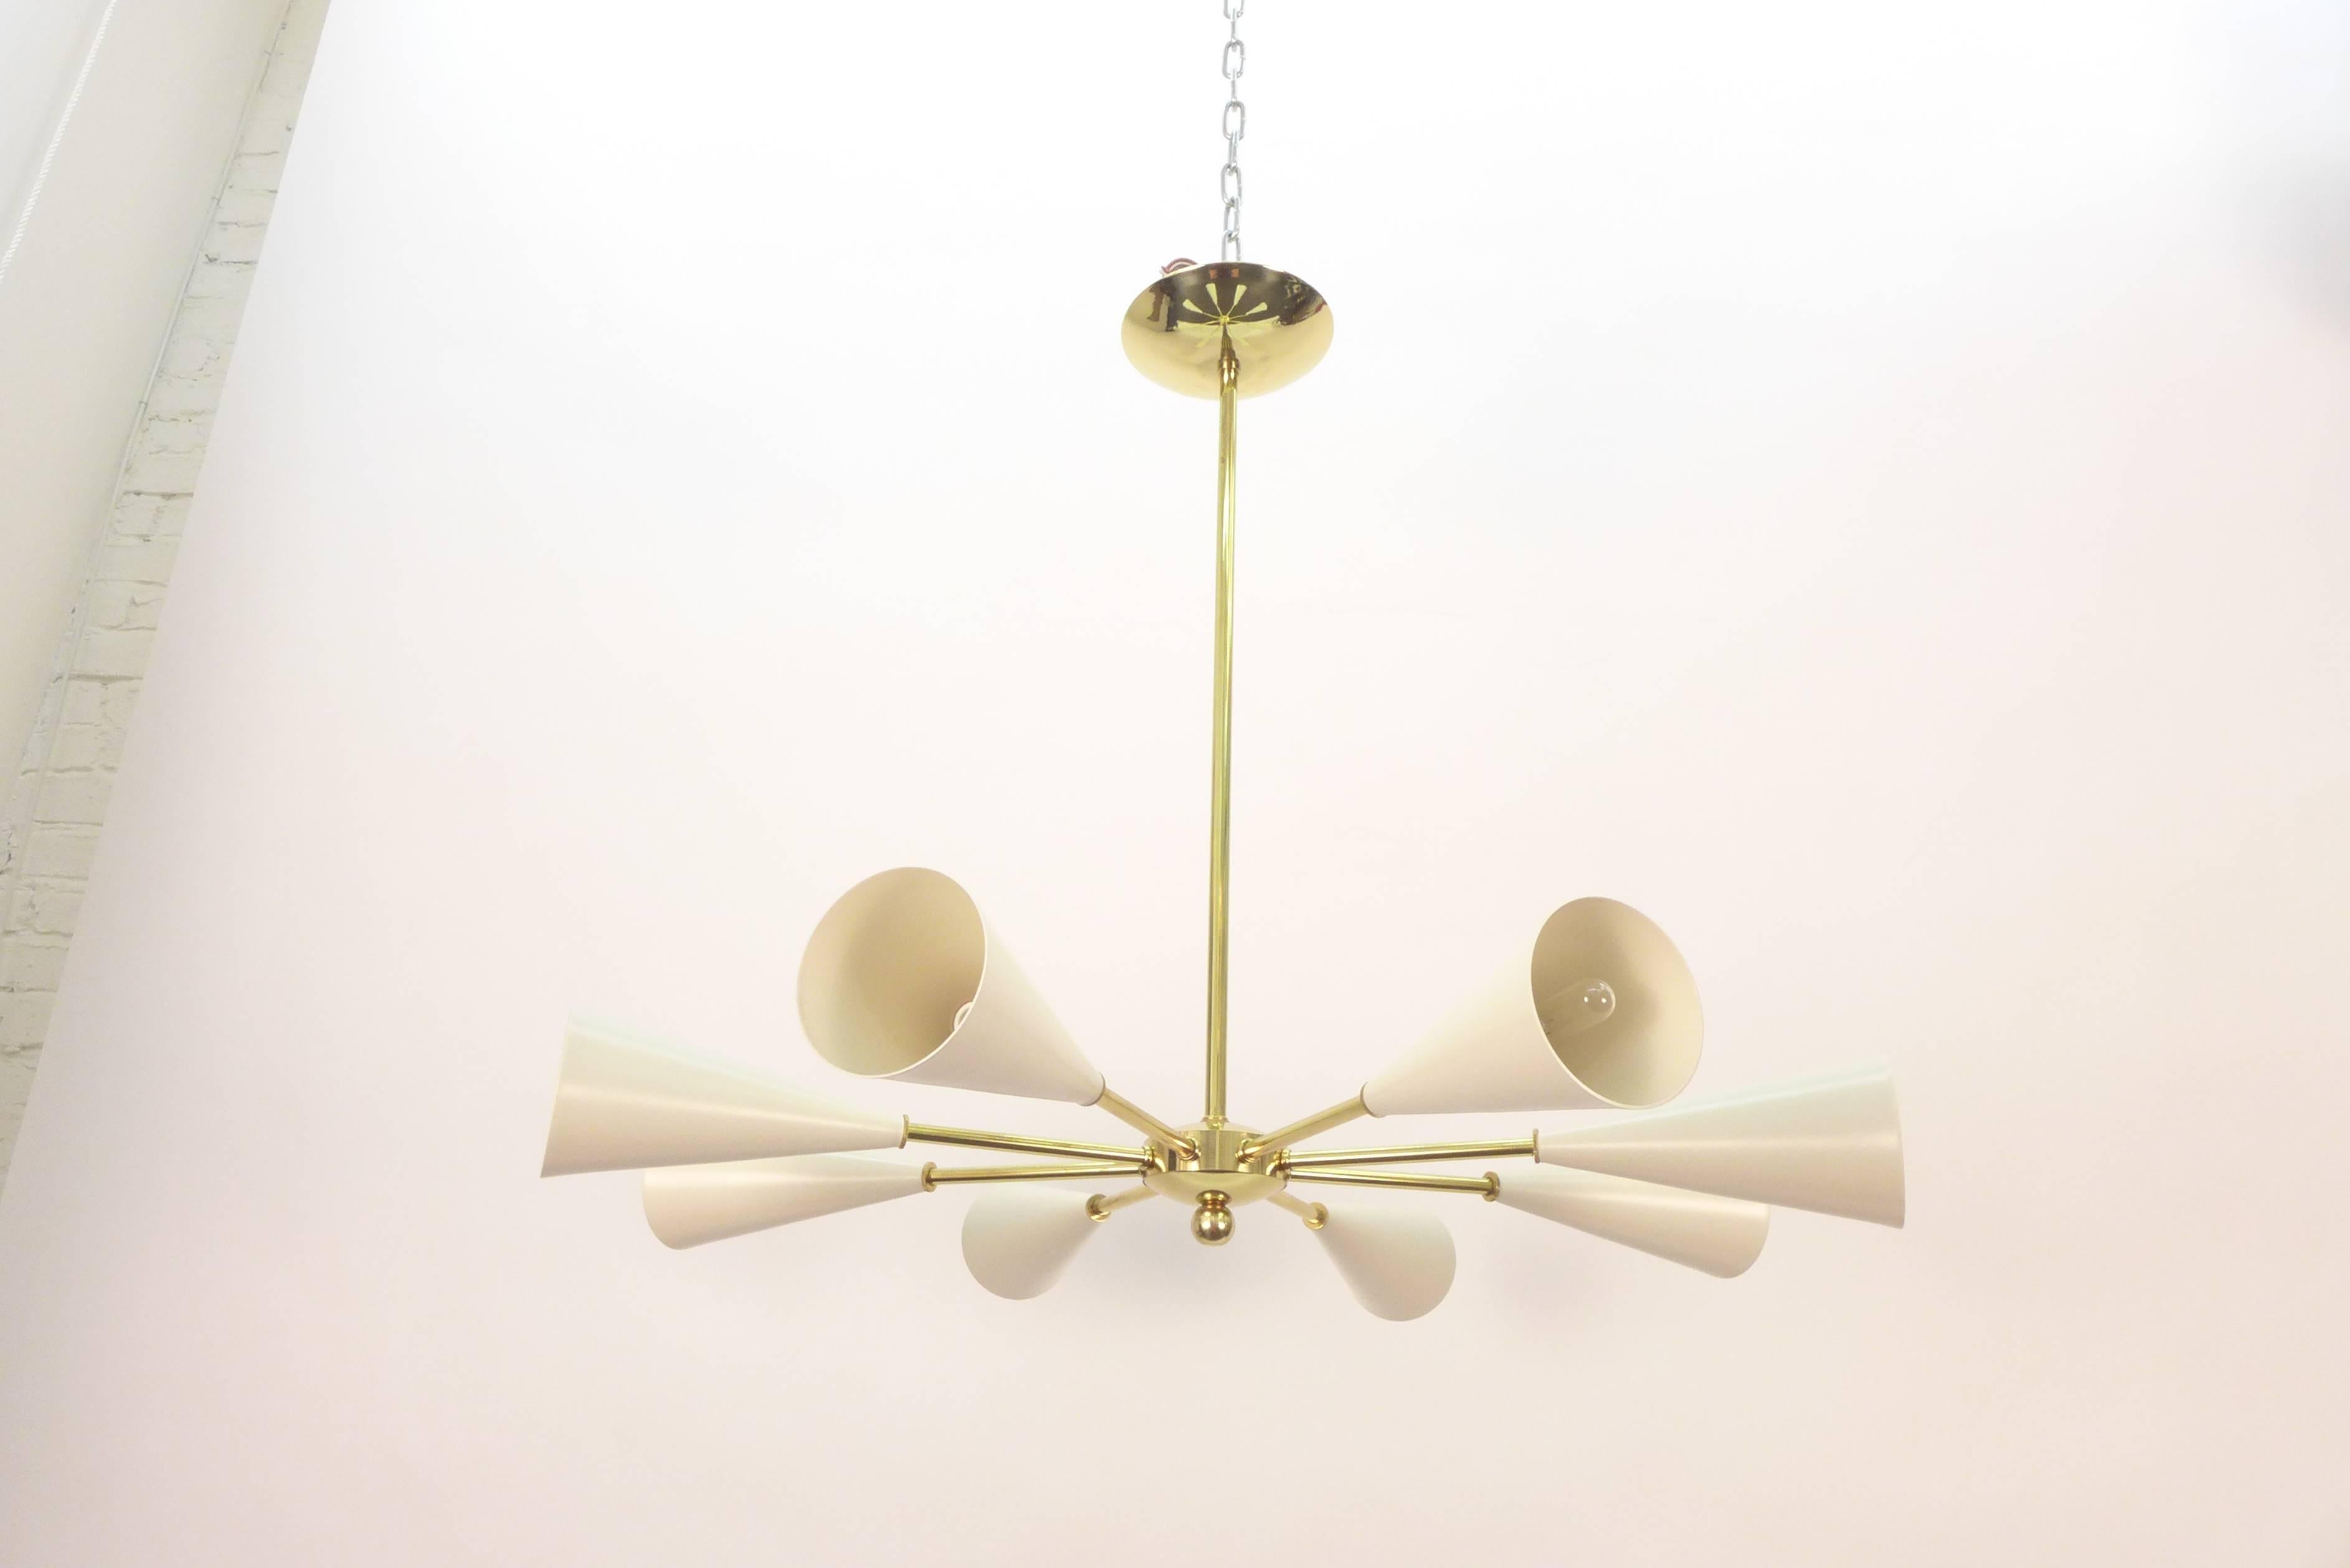 Sputnik chandelier composed of eight conical shades.
Candelabra sockets. Max 60 watt per socket.
Unlacquered brass hardware.
This model can be customized with any color and finish.